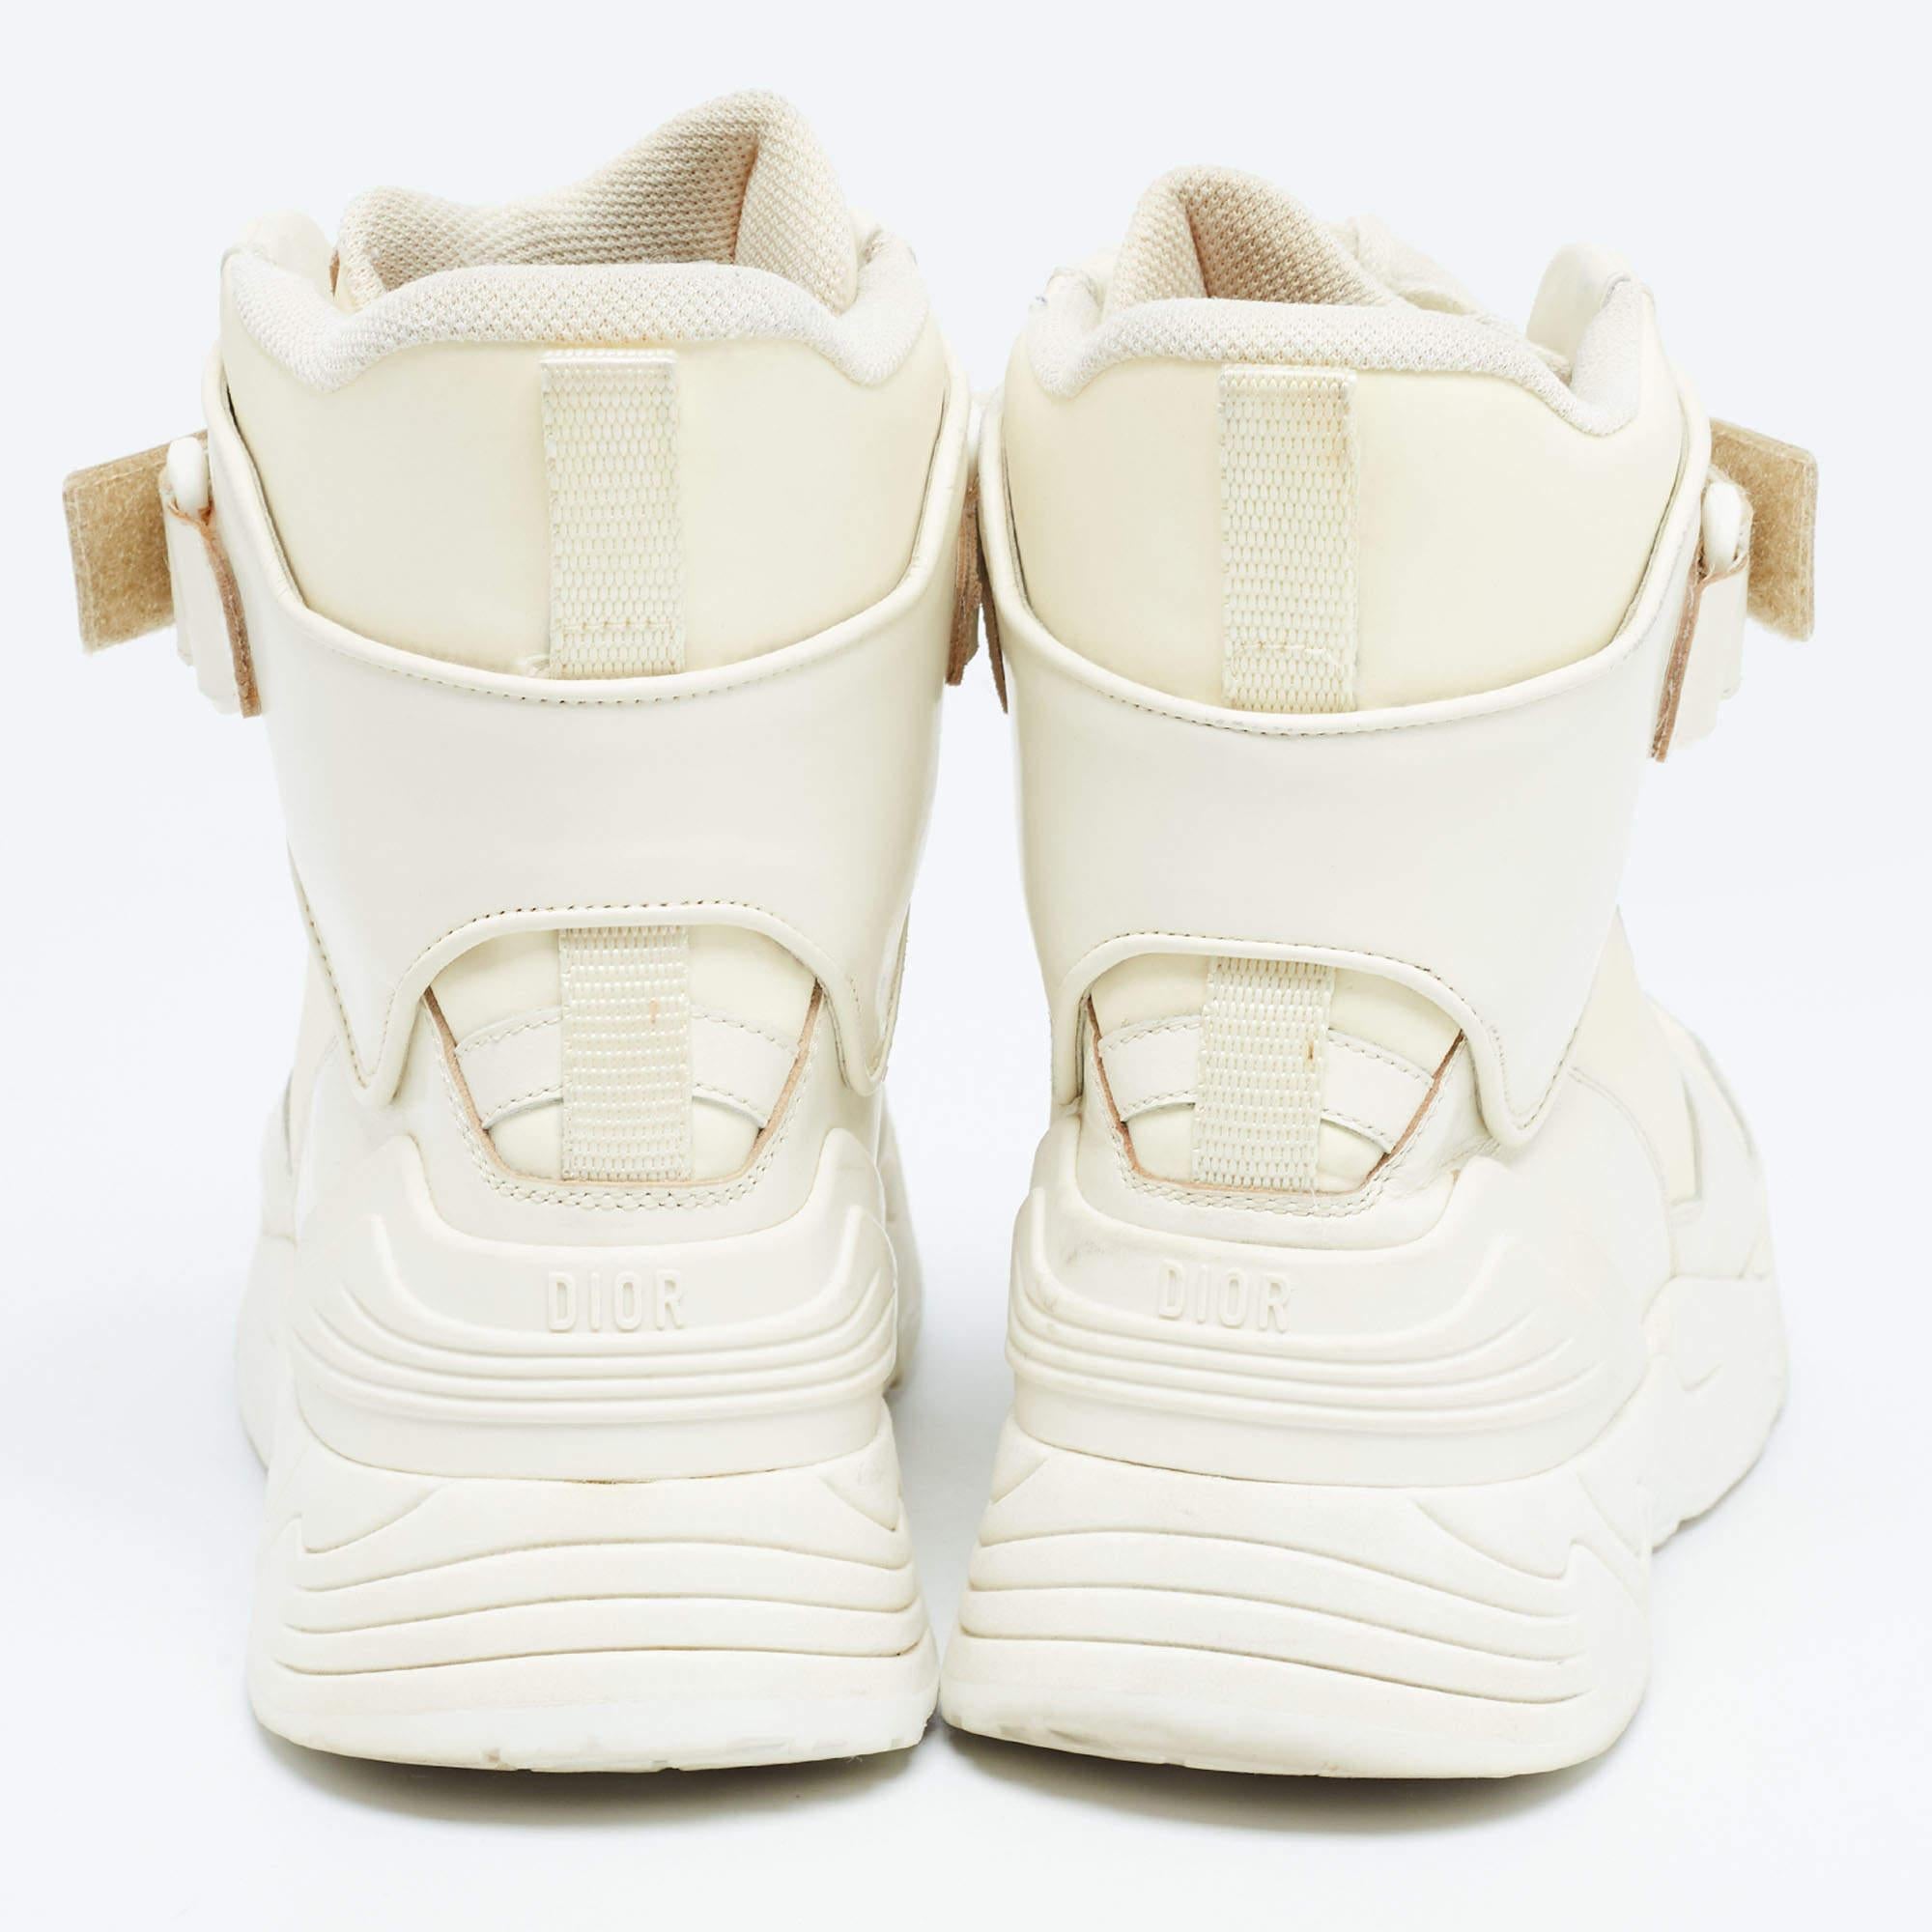 Dior Cream Leather Jumper High Top Sneakers Size 36 For Sale 2